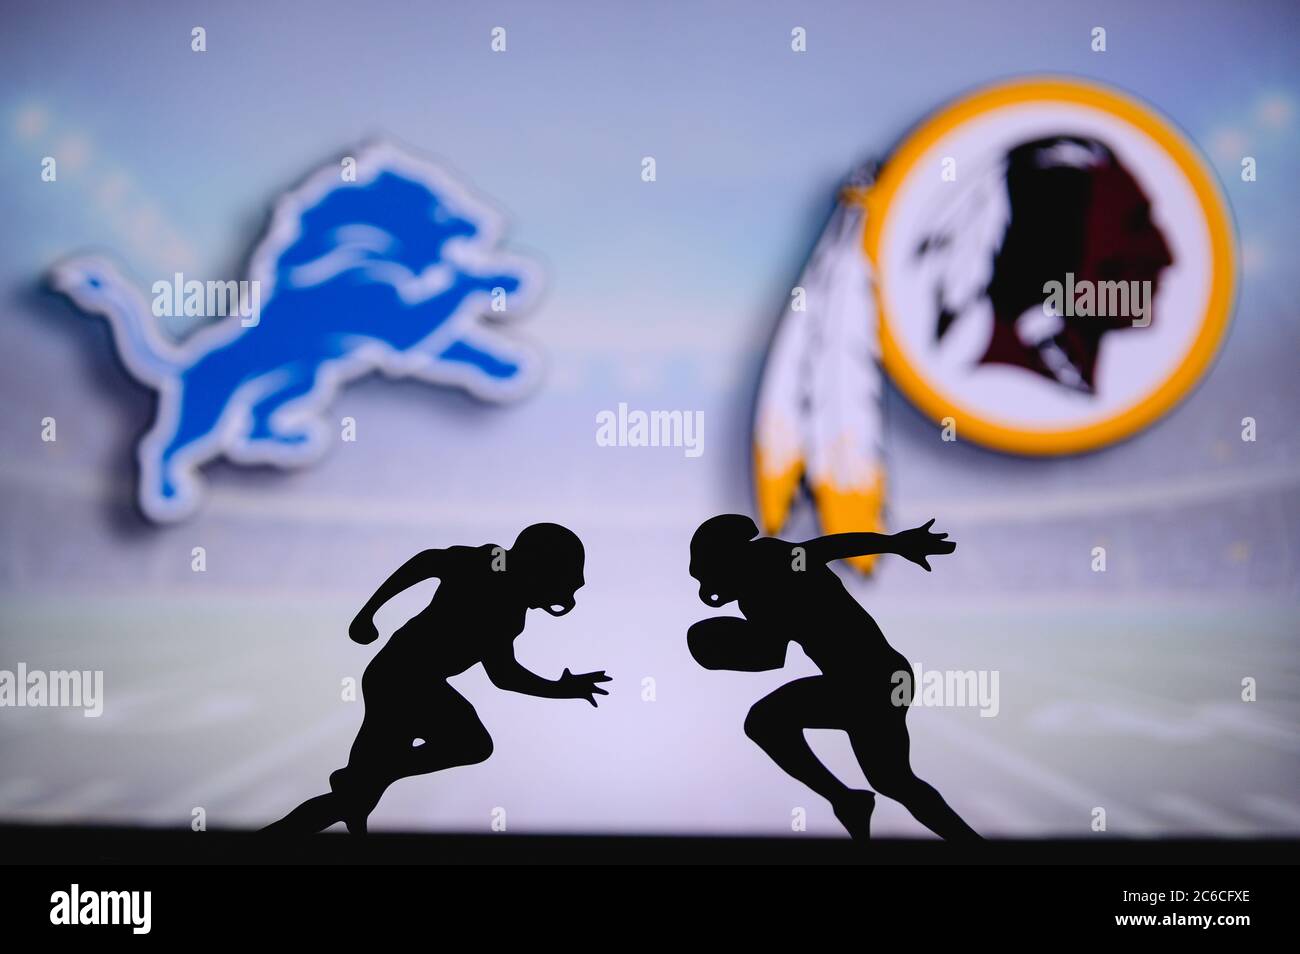 Detroit Lions vs. Washington Redskins. NFL match poster. Two american football players silhouette facing each other on the field. Clubs logo in backgr Stock Photo